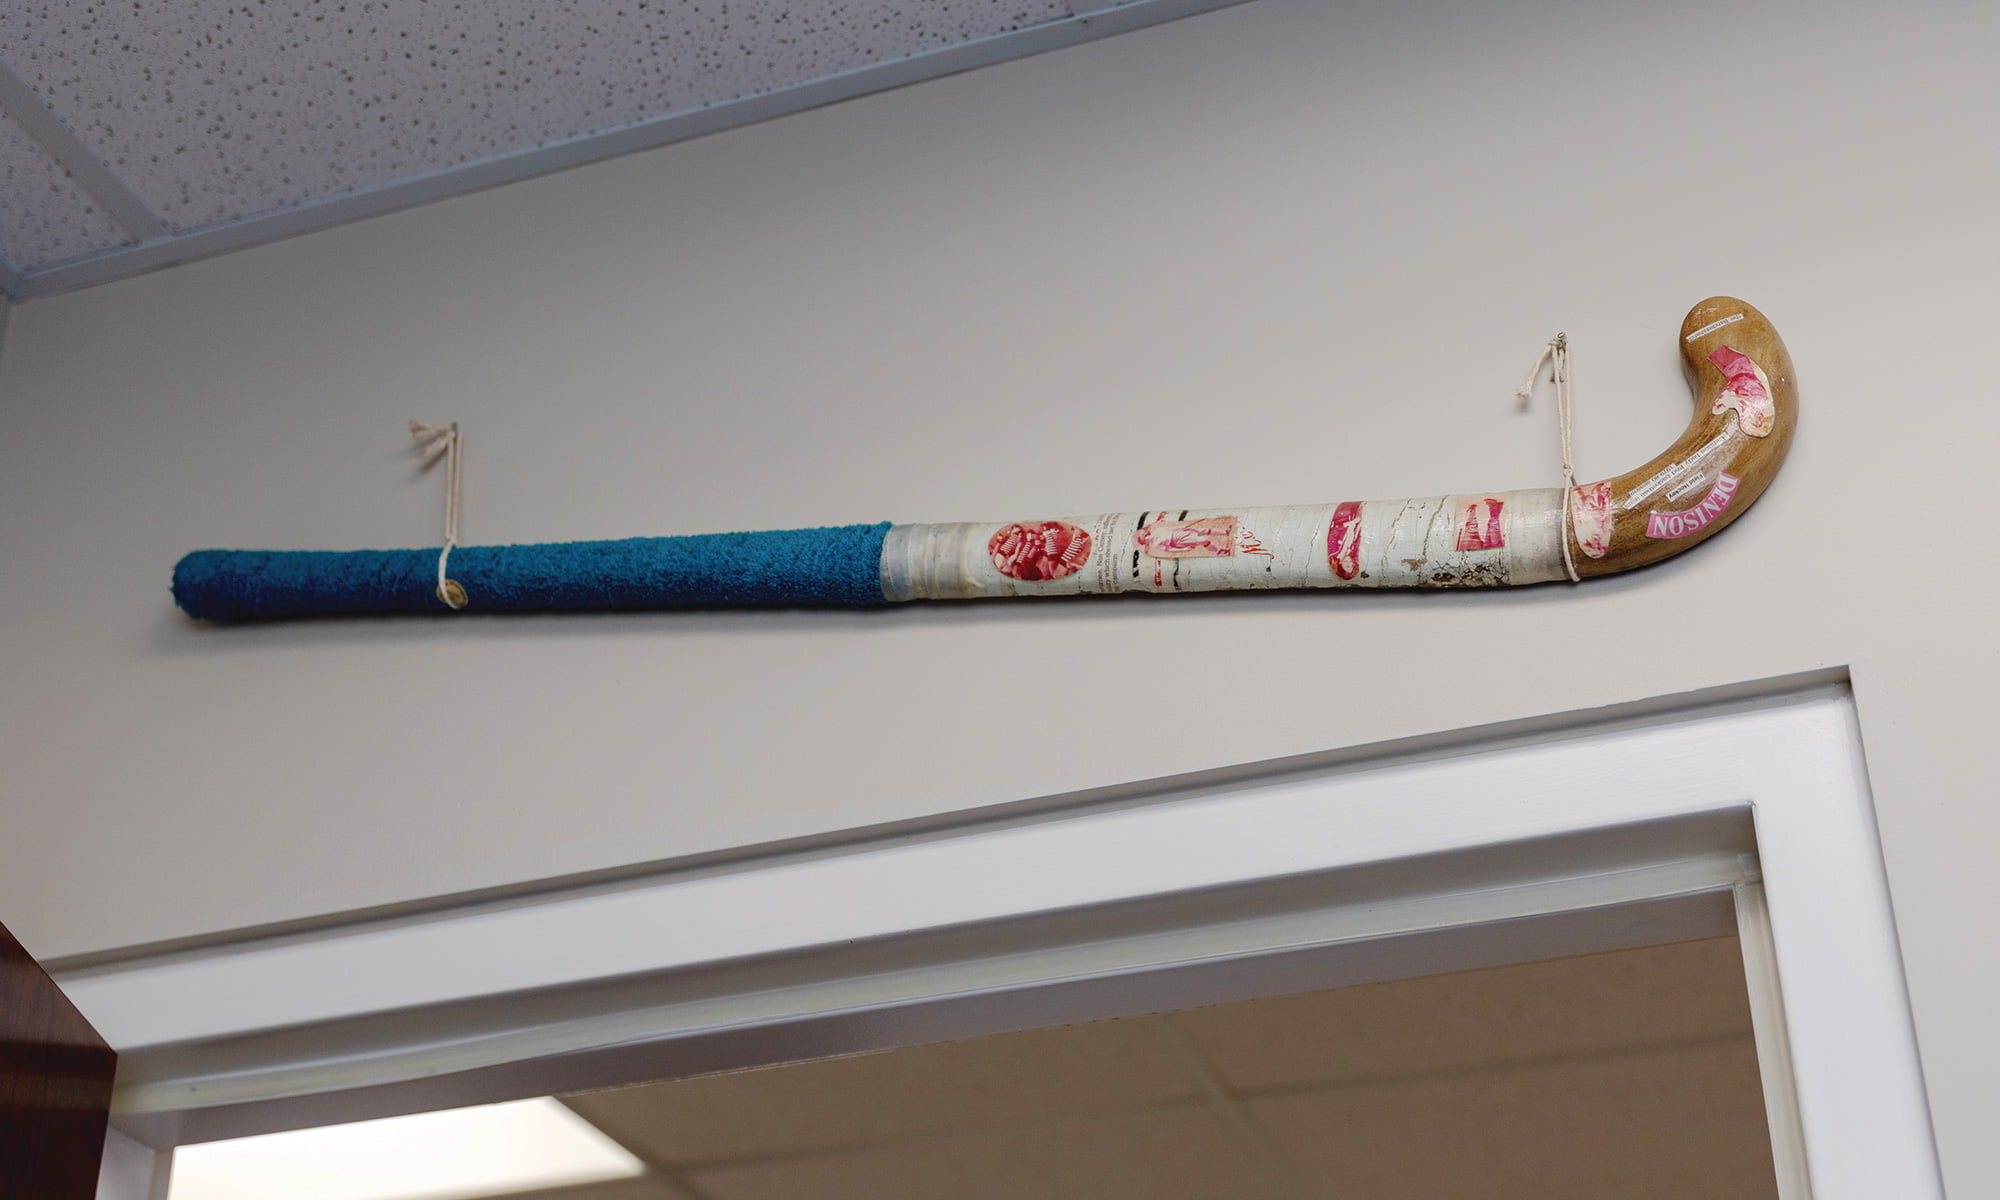 The 40-year-old field hockey stick hanging over her doorway.